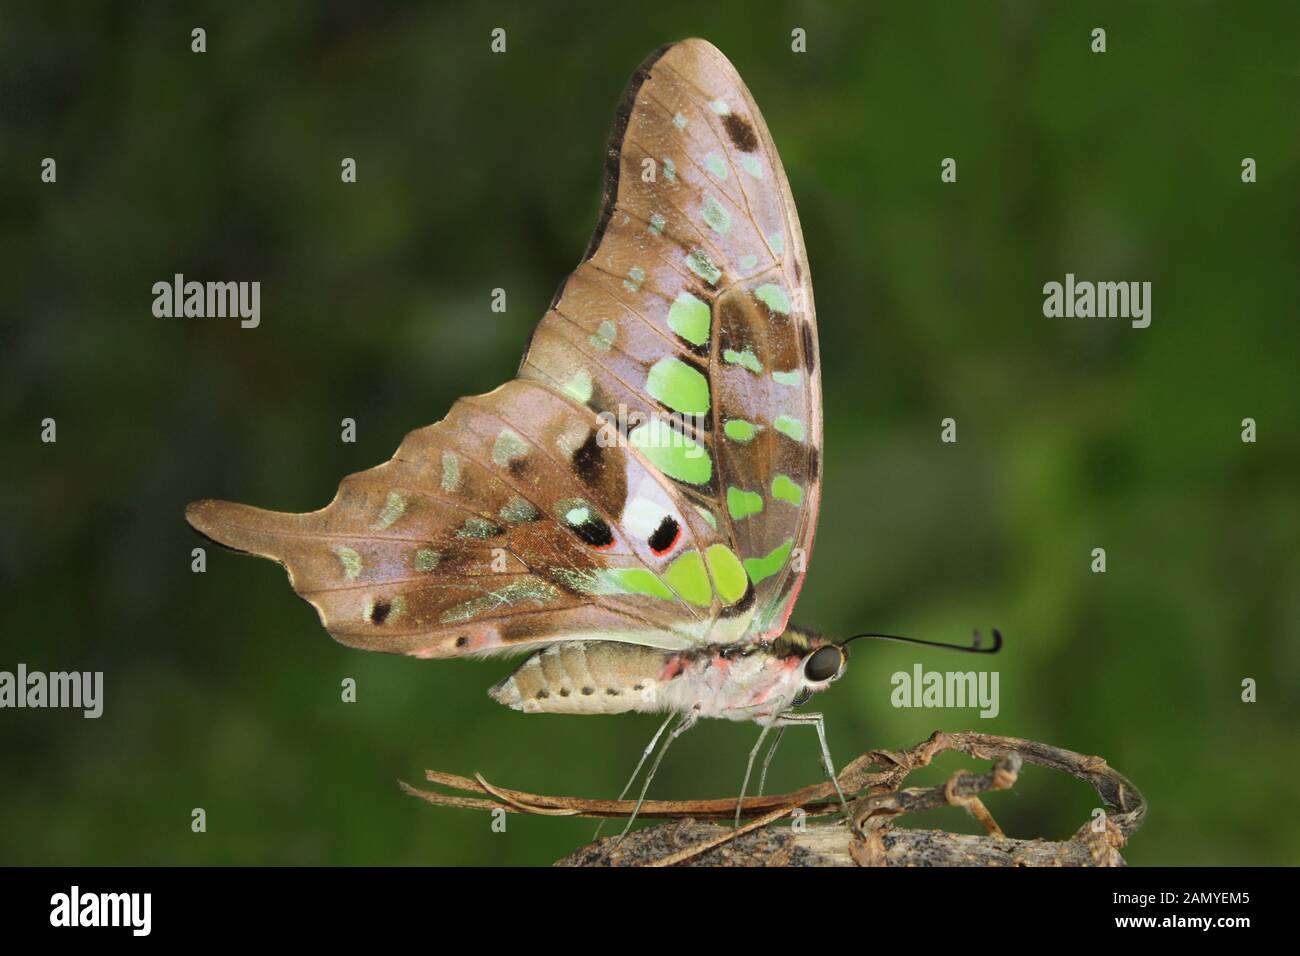 Tailed Jay Graphium agamemnon Stockfoto